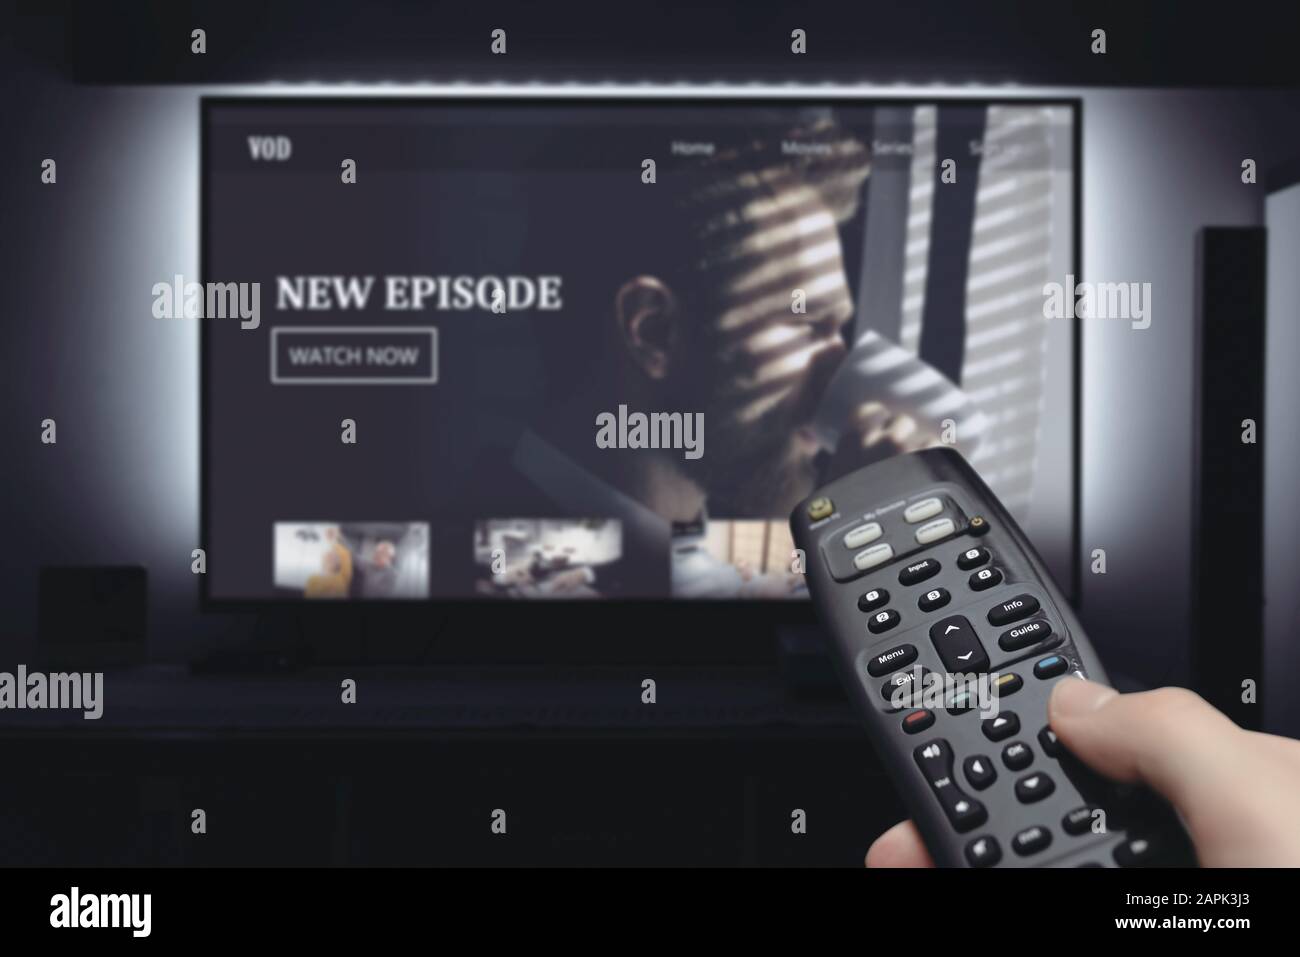 VOD service on television. Man watching TV, streaming service, video on demand, remote control in hand. Stock Photo